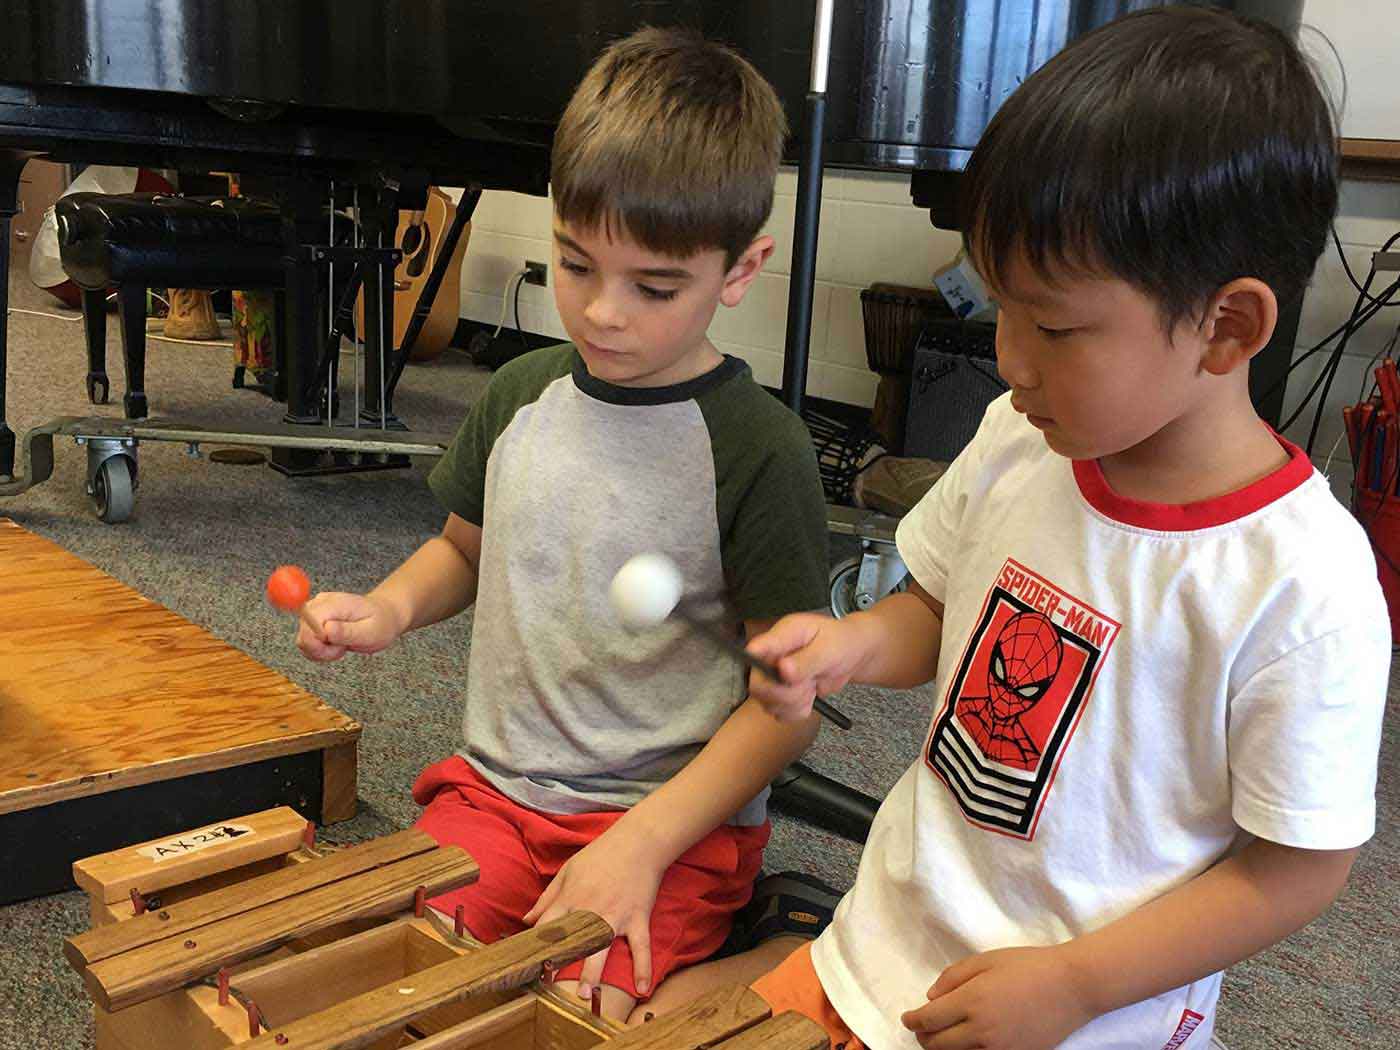 Students explore sound, music and creativity in the Baker music lab